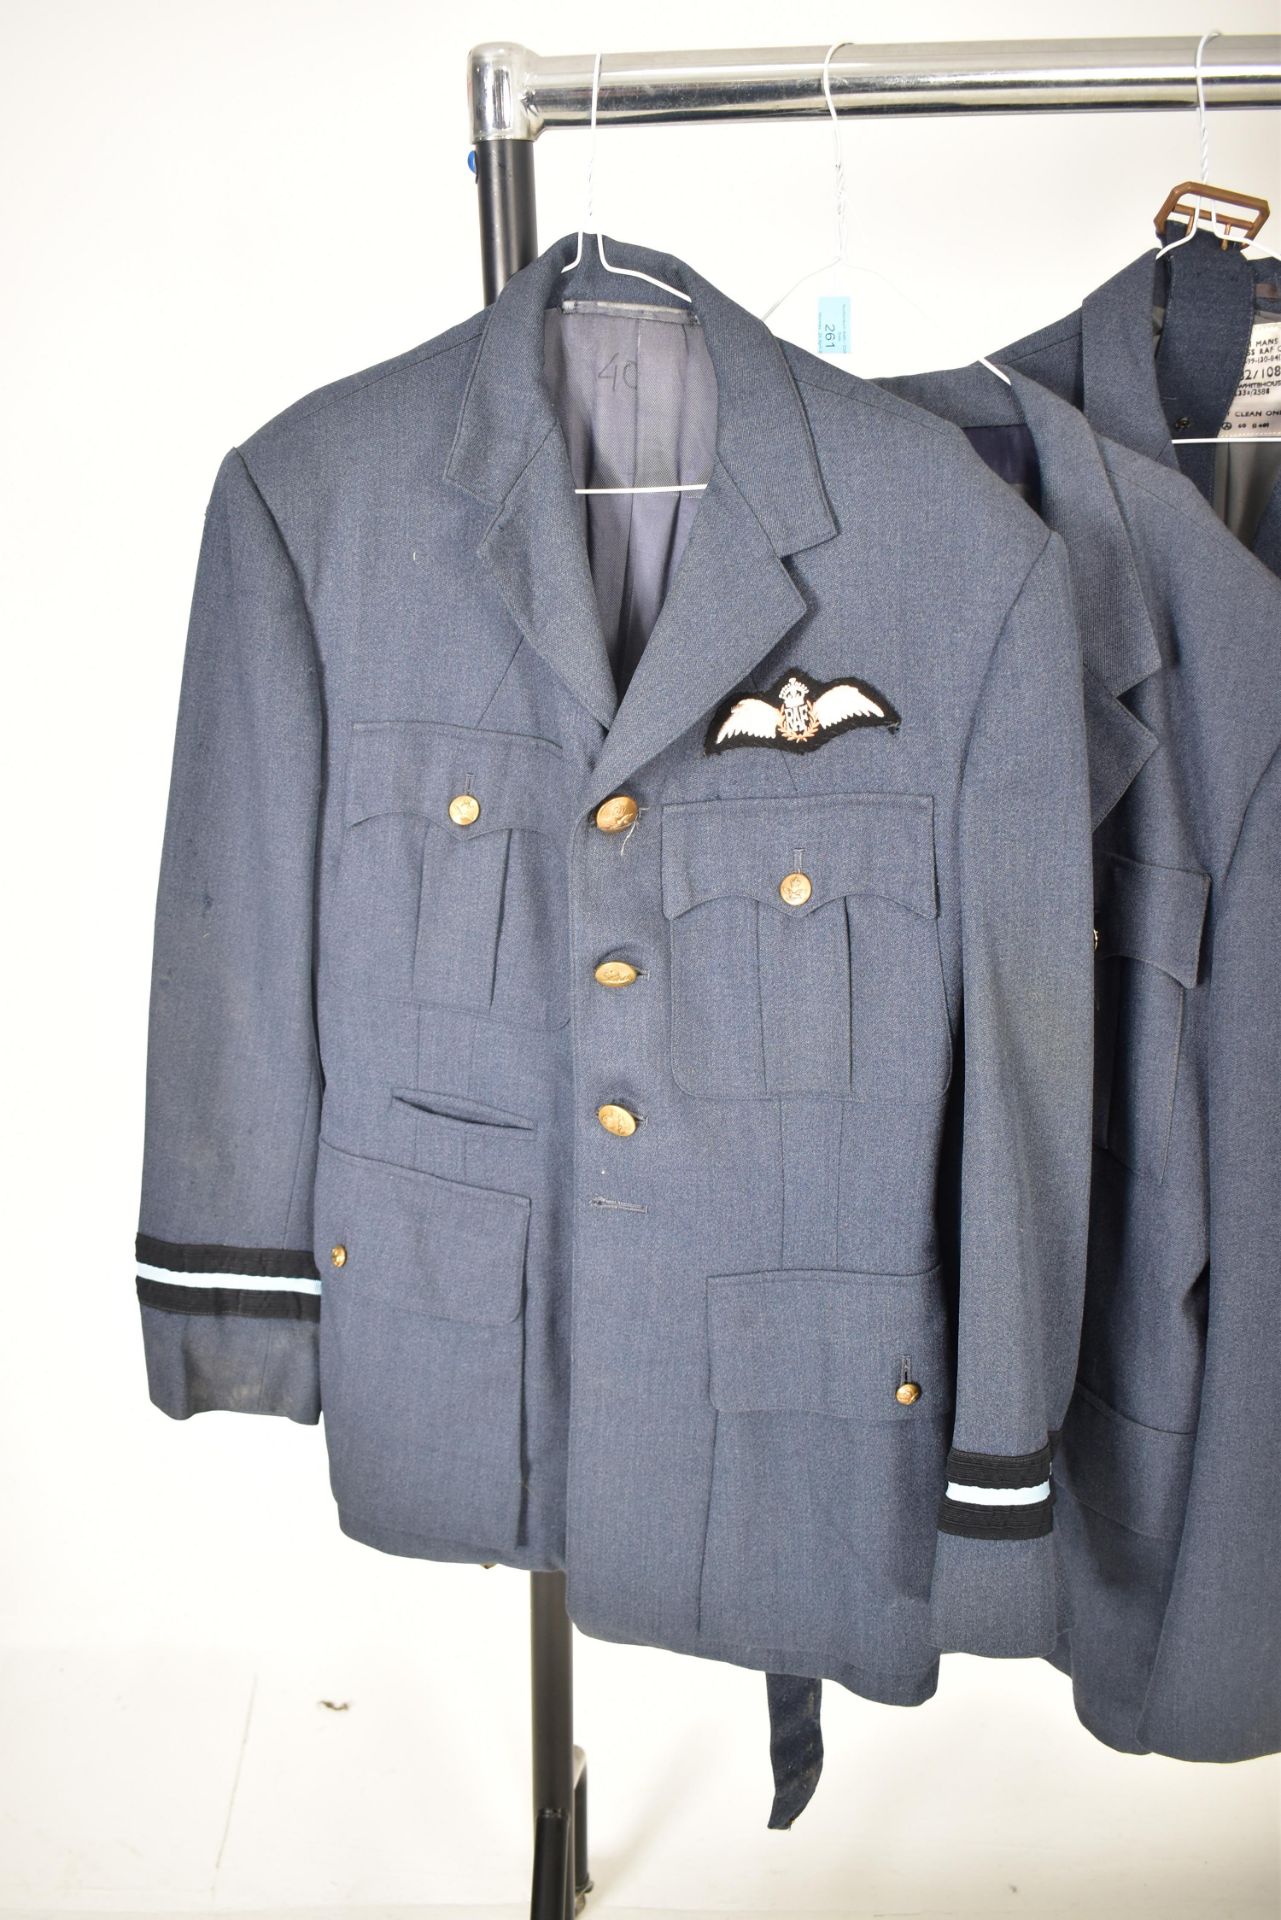 COLLECTION OF POST WAR RAF UNIFORMS - Image 2 of 5